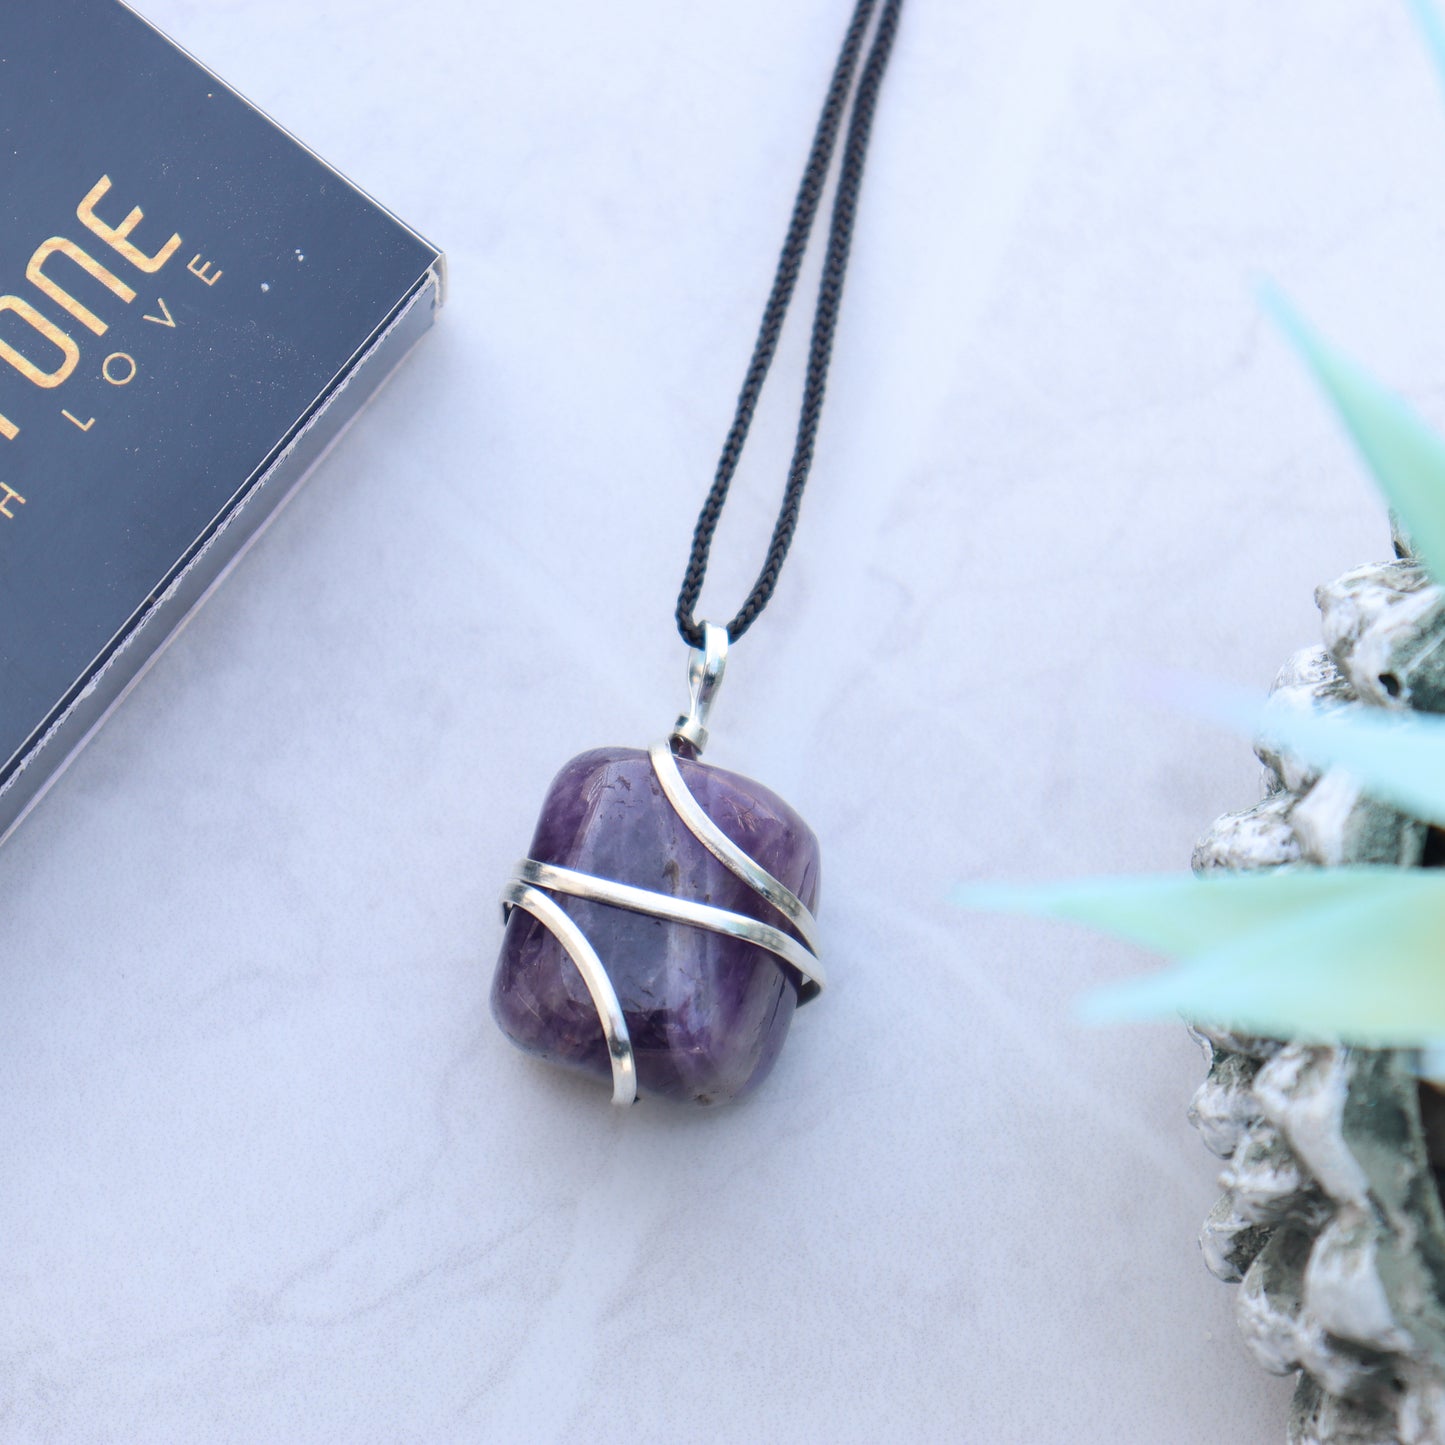 Amethyst Crystal Pendant Necklace for Stress Relief and Anxiety - Handmade & Ethically Sourced Raw Stone Necklace for Style and Wellness- Best Spiritual Healing Mother's Day Gift for her